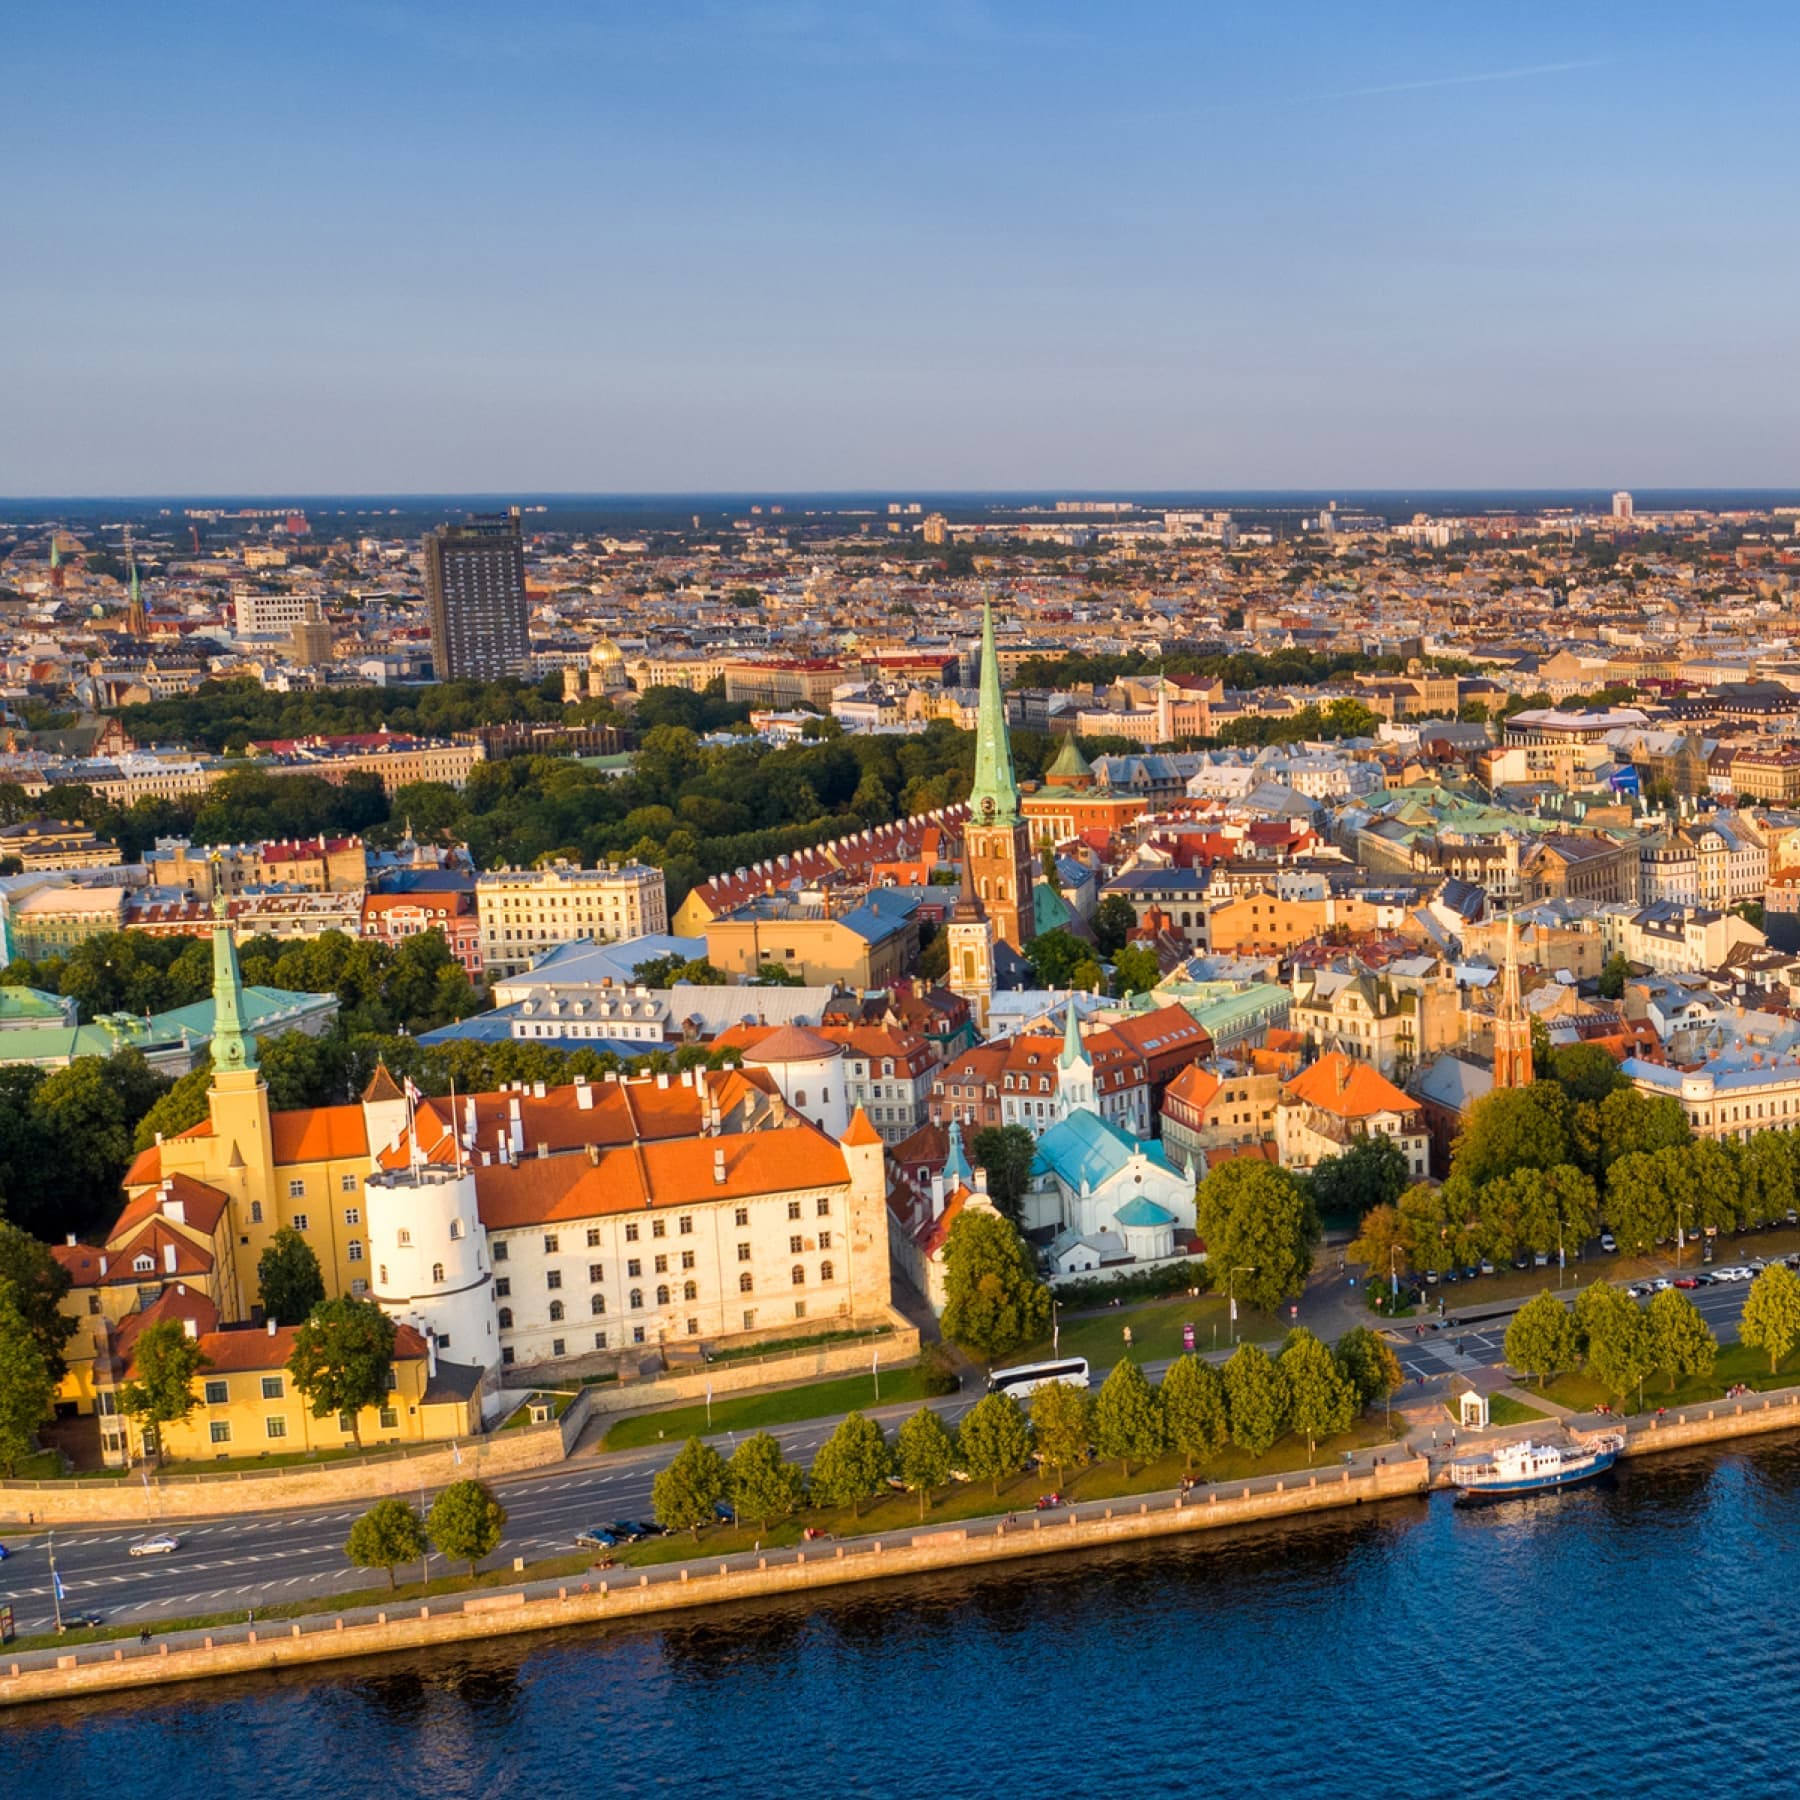 Make sure you visit Riga for your romantic city breaks